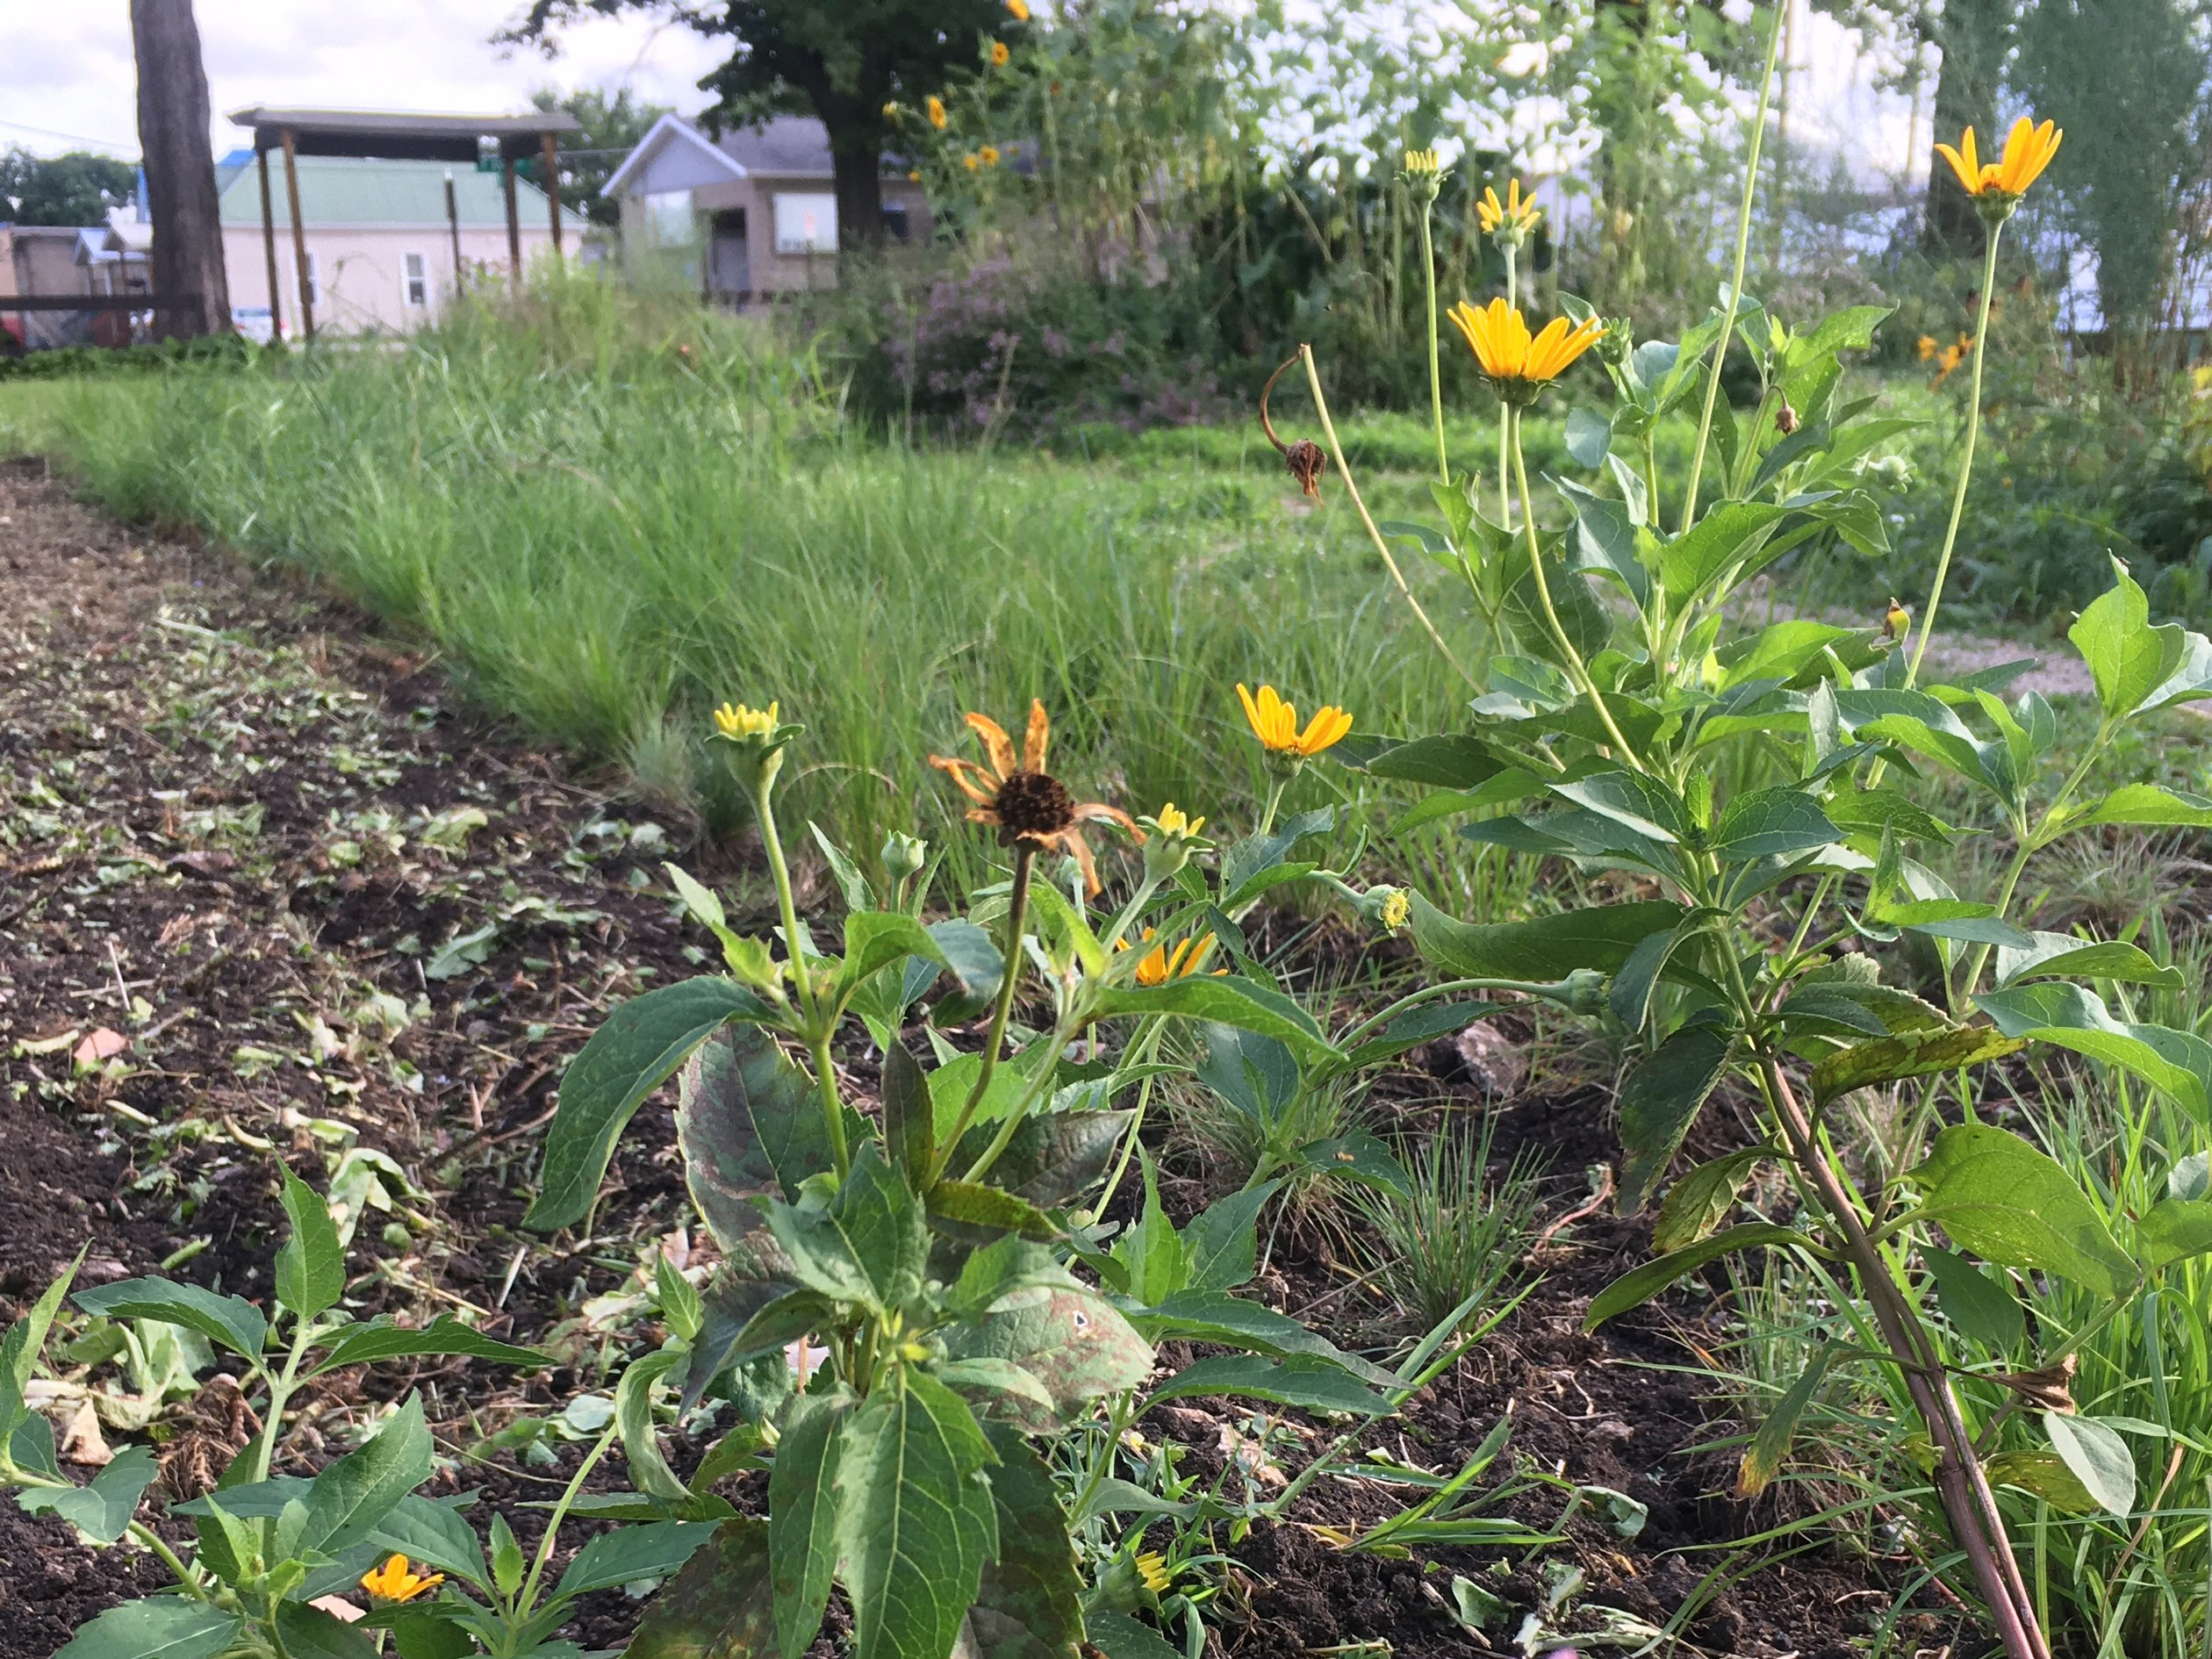 Bright yellow flowers of black-eye susan bloom in this habitat area on a small urban farm